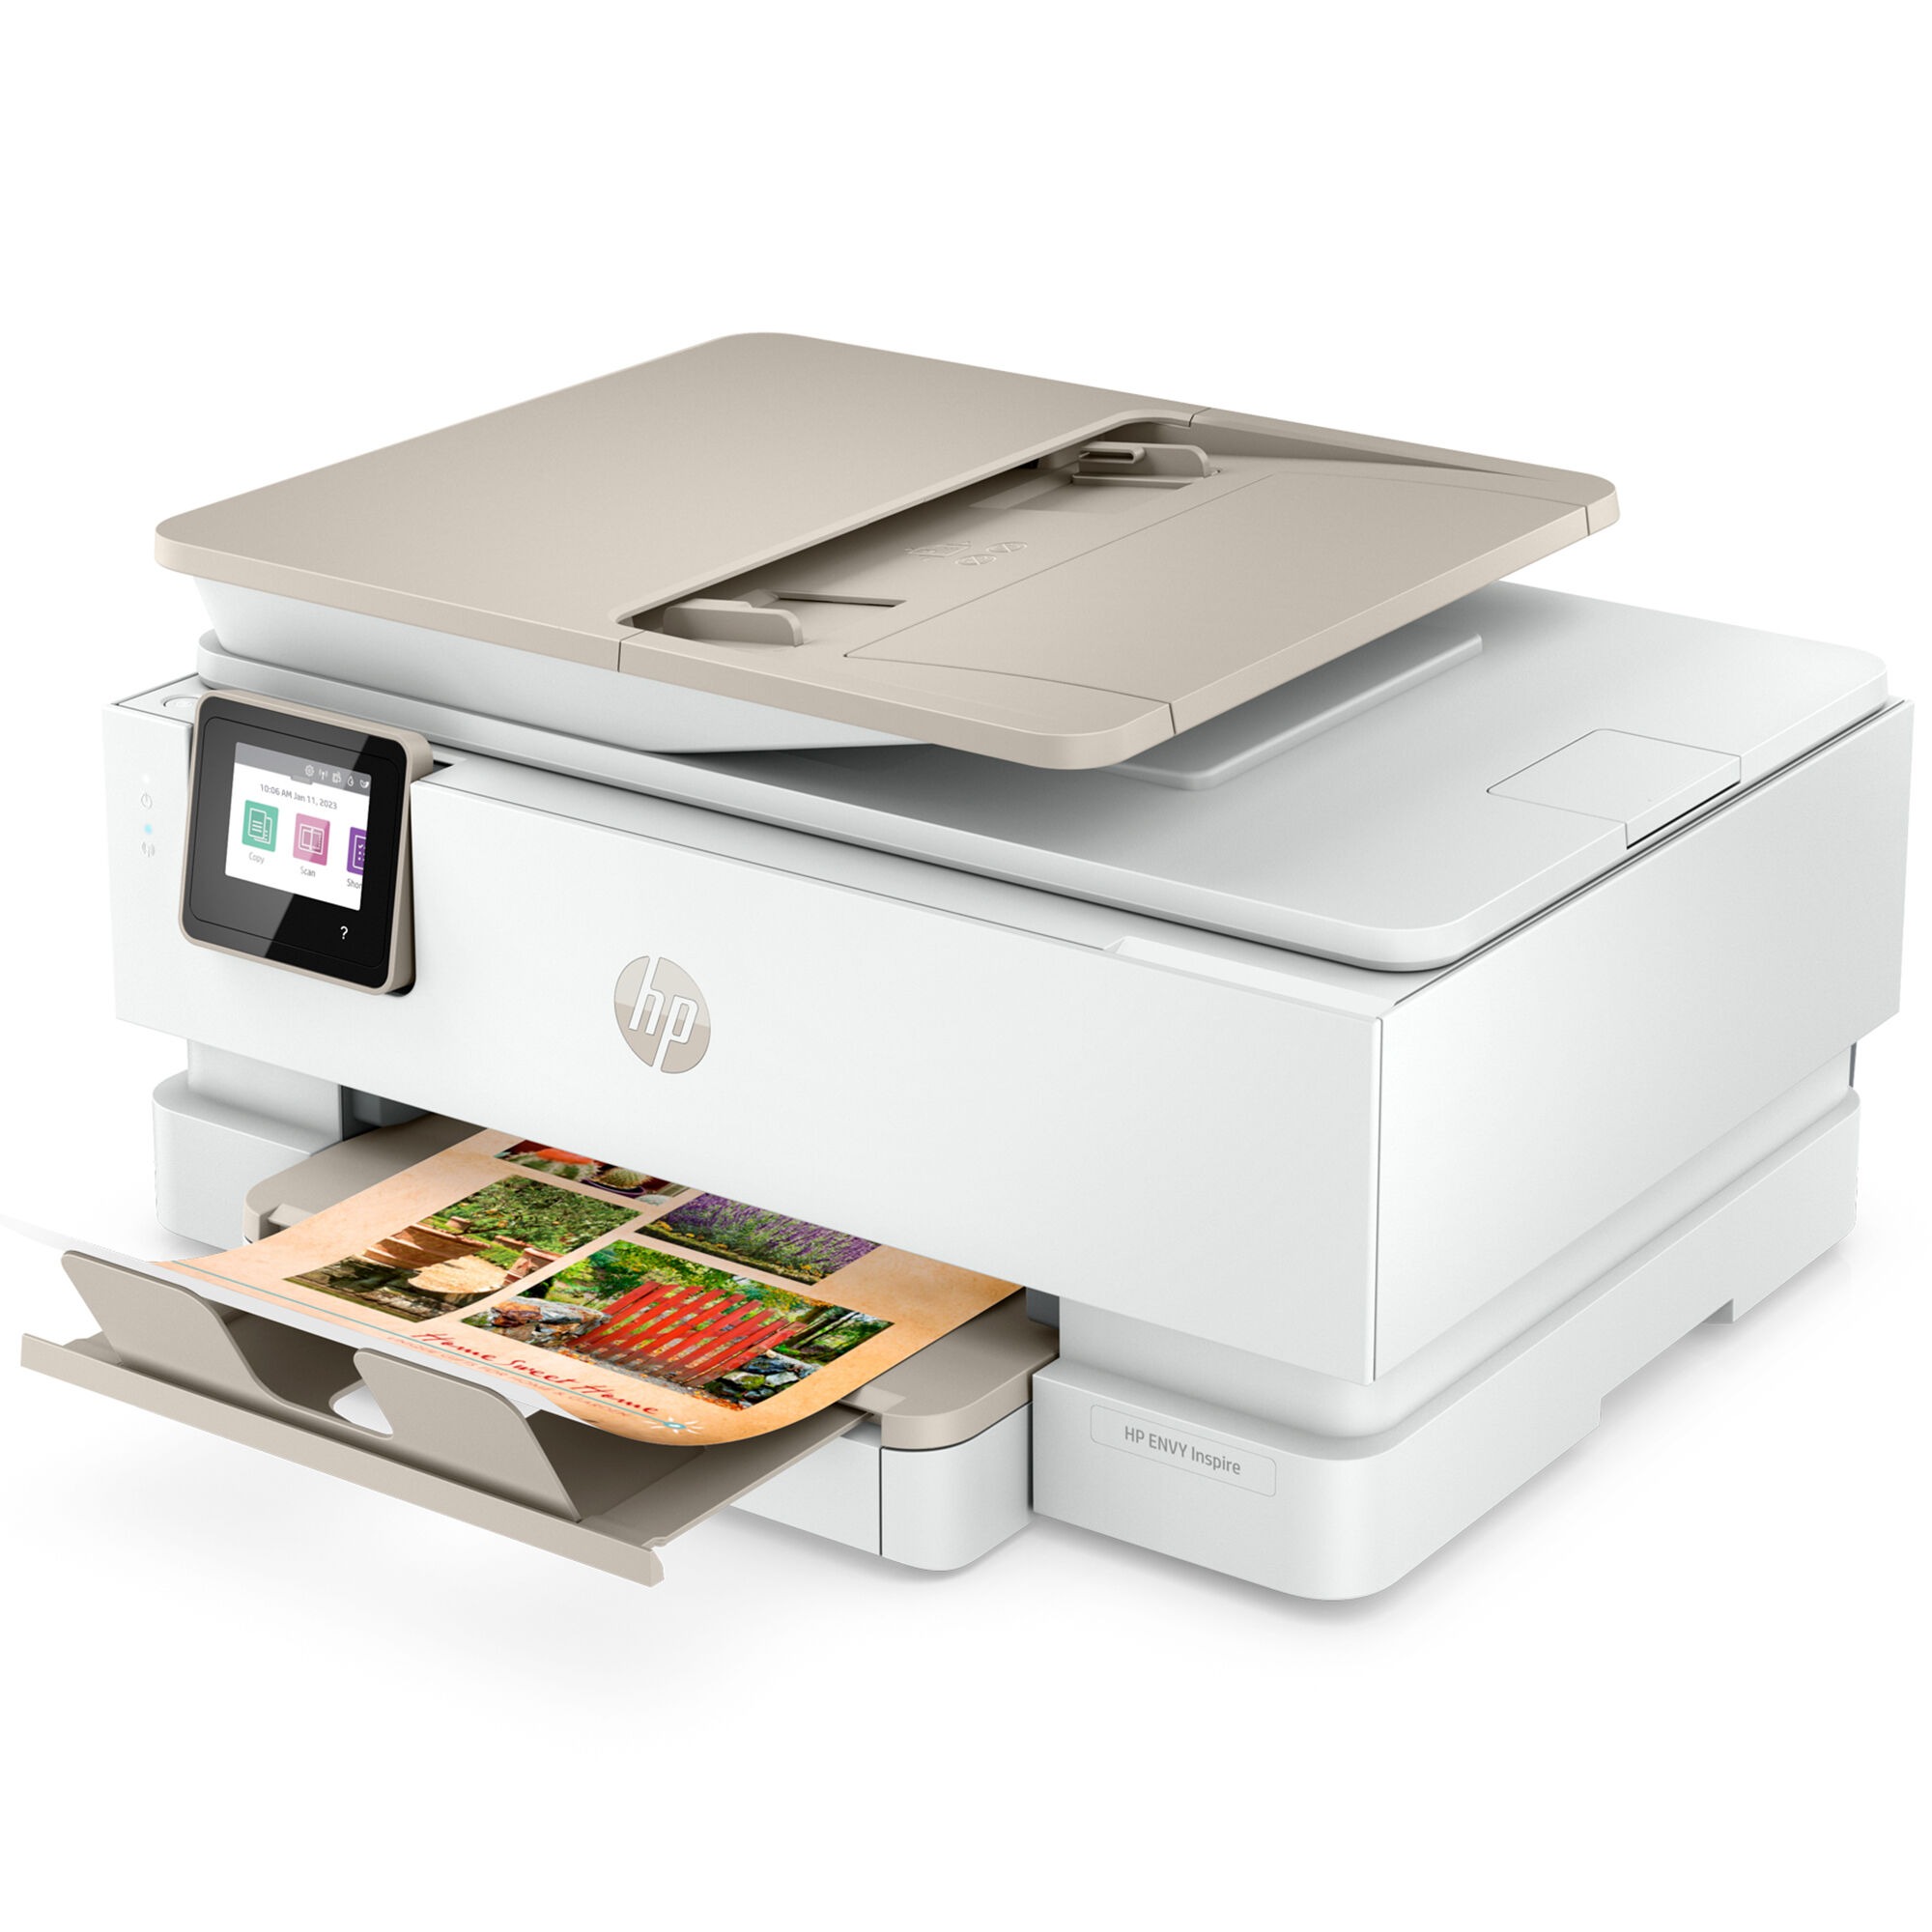 HP ENVY Inspire 7955e All-in-One Printer with Bonus 3 Months of Instant Ink  with HP+